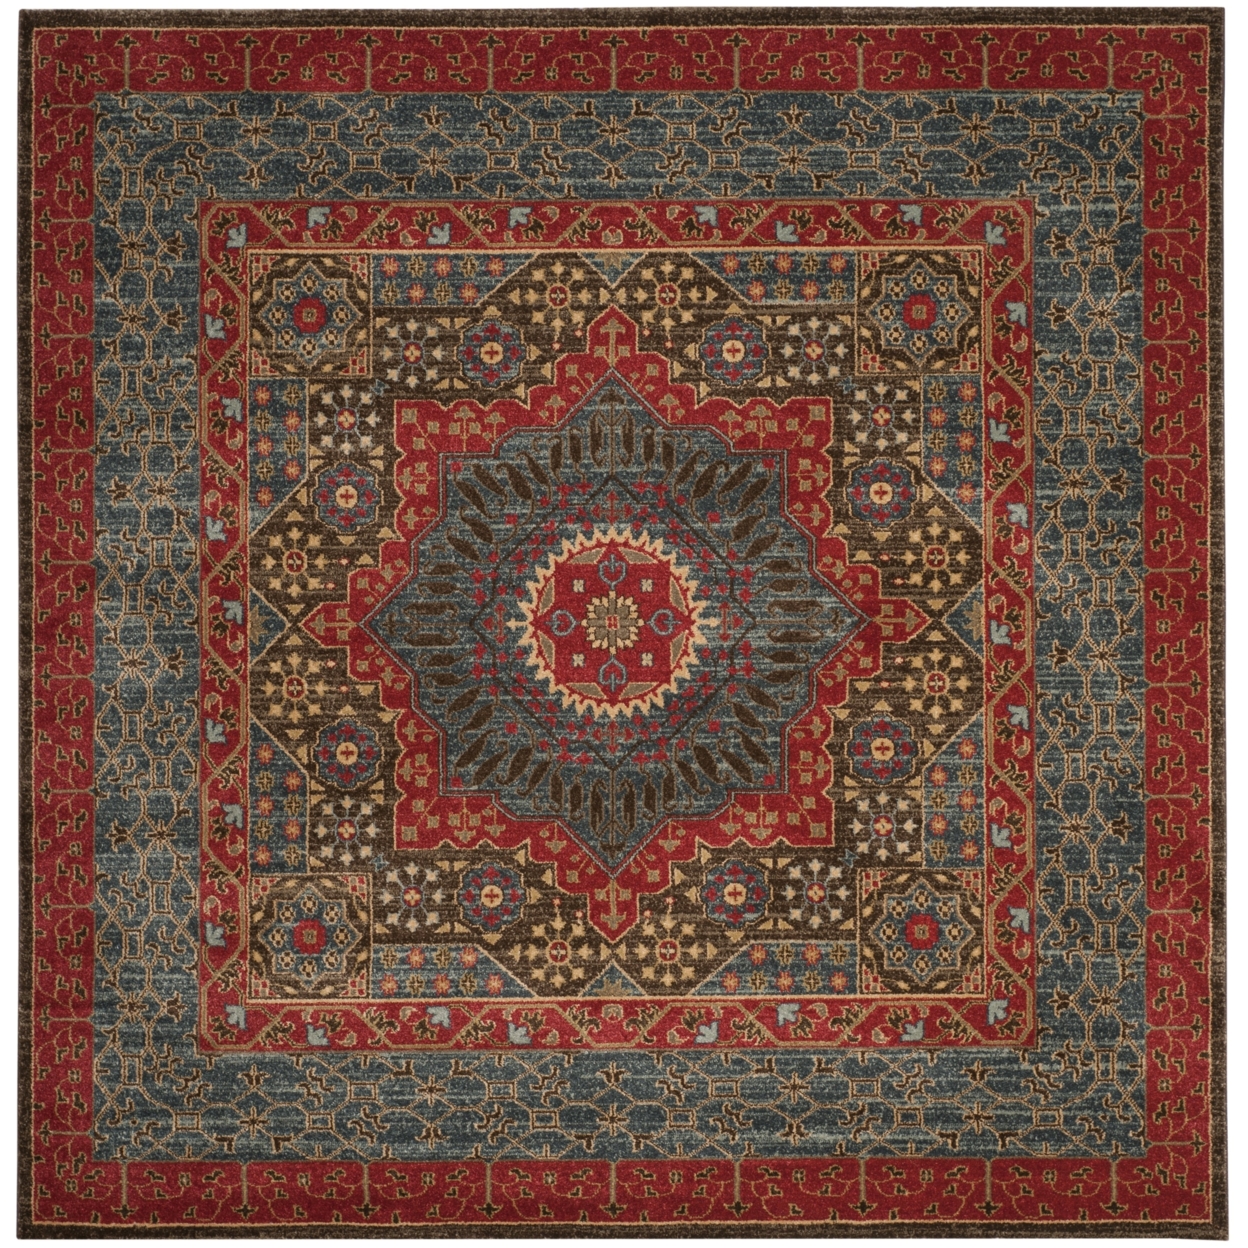 SAFAVIEH Mahal Collection MAH620C Navy / Red Rug - 9' Square